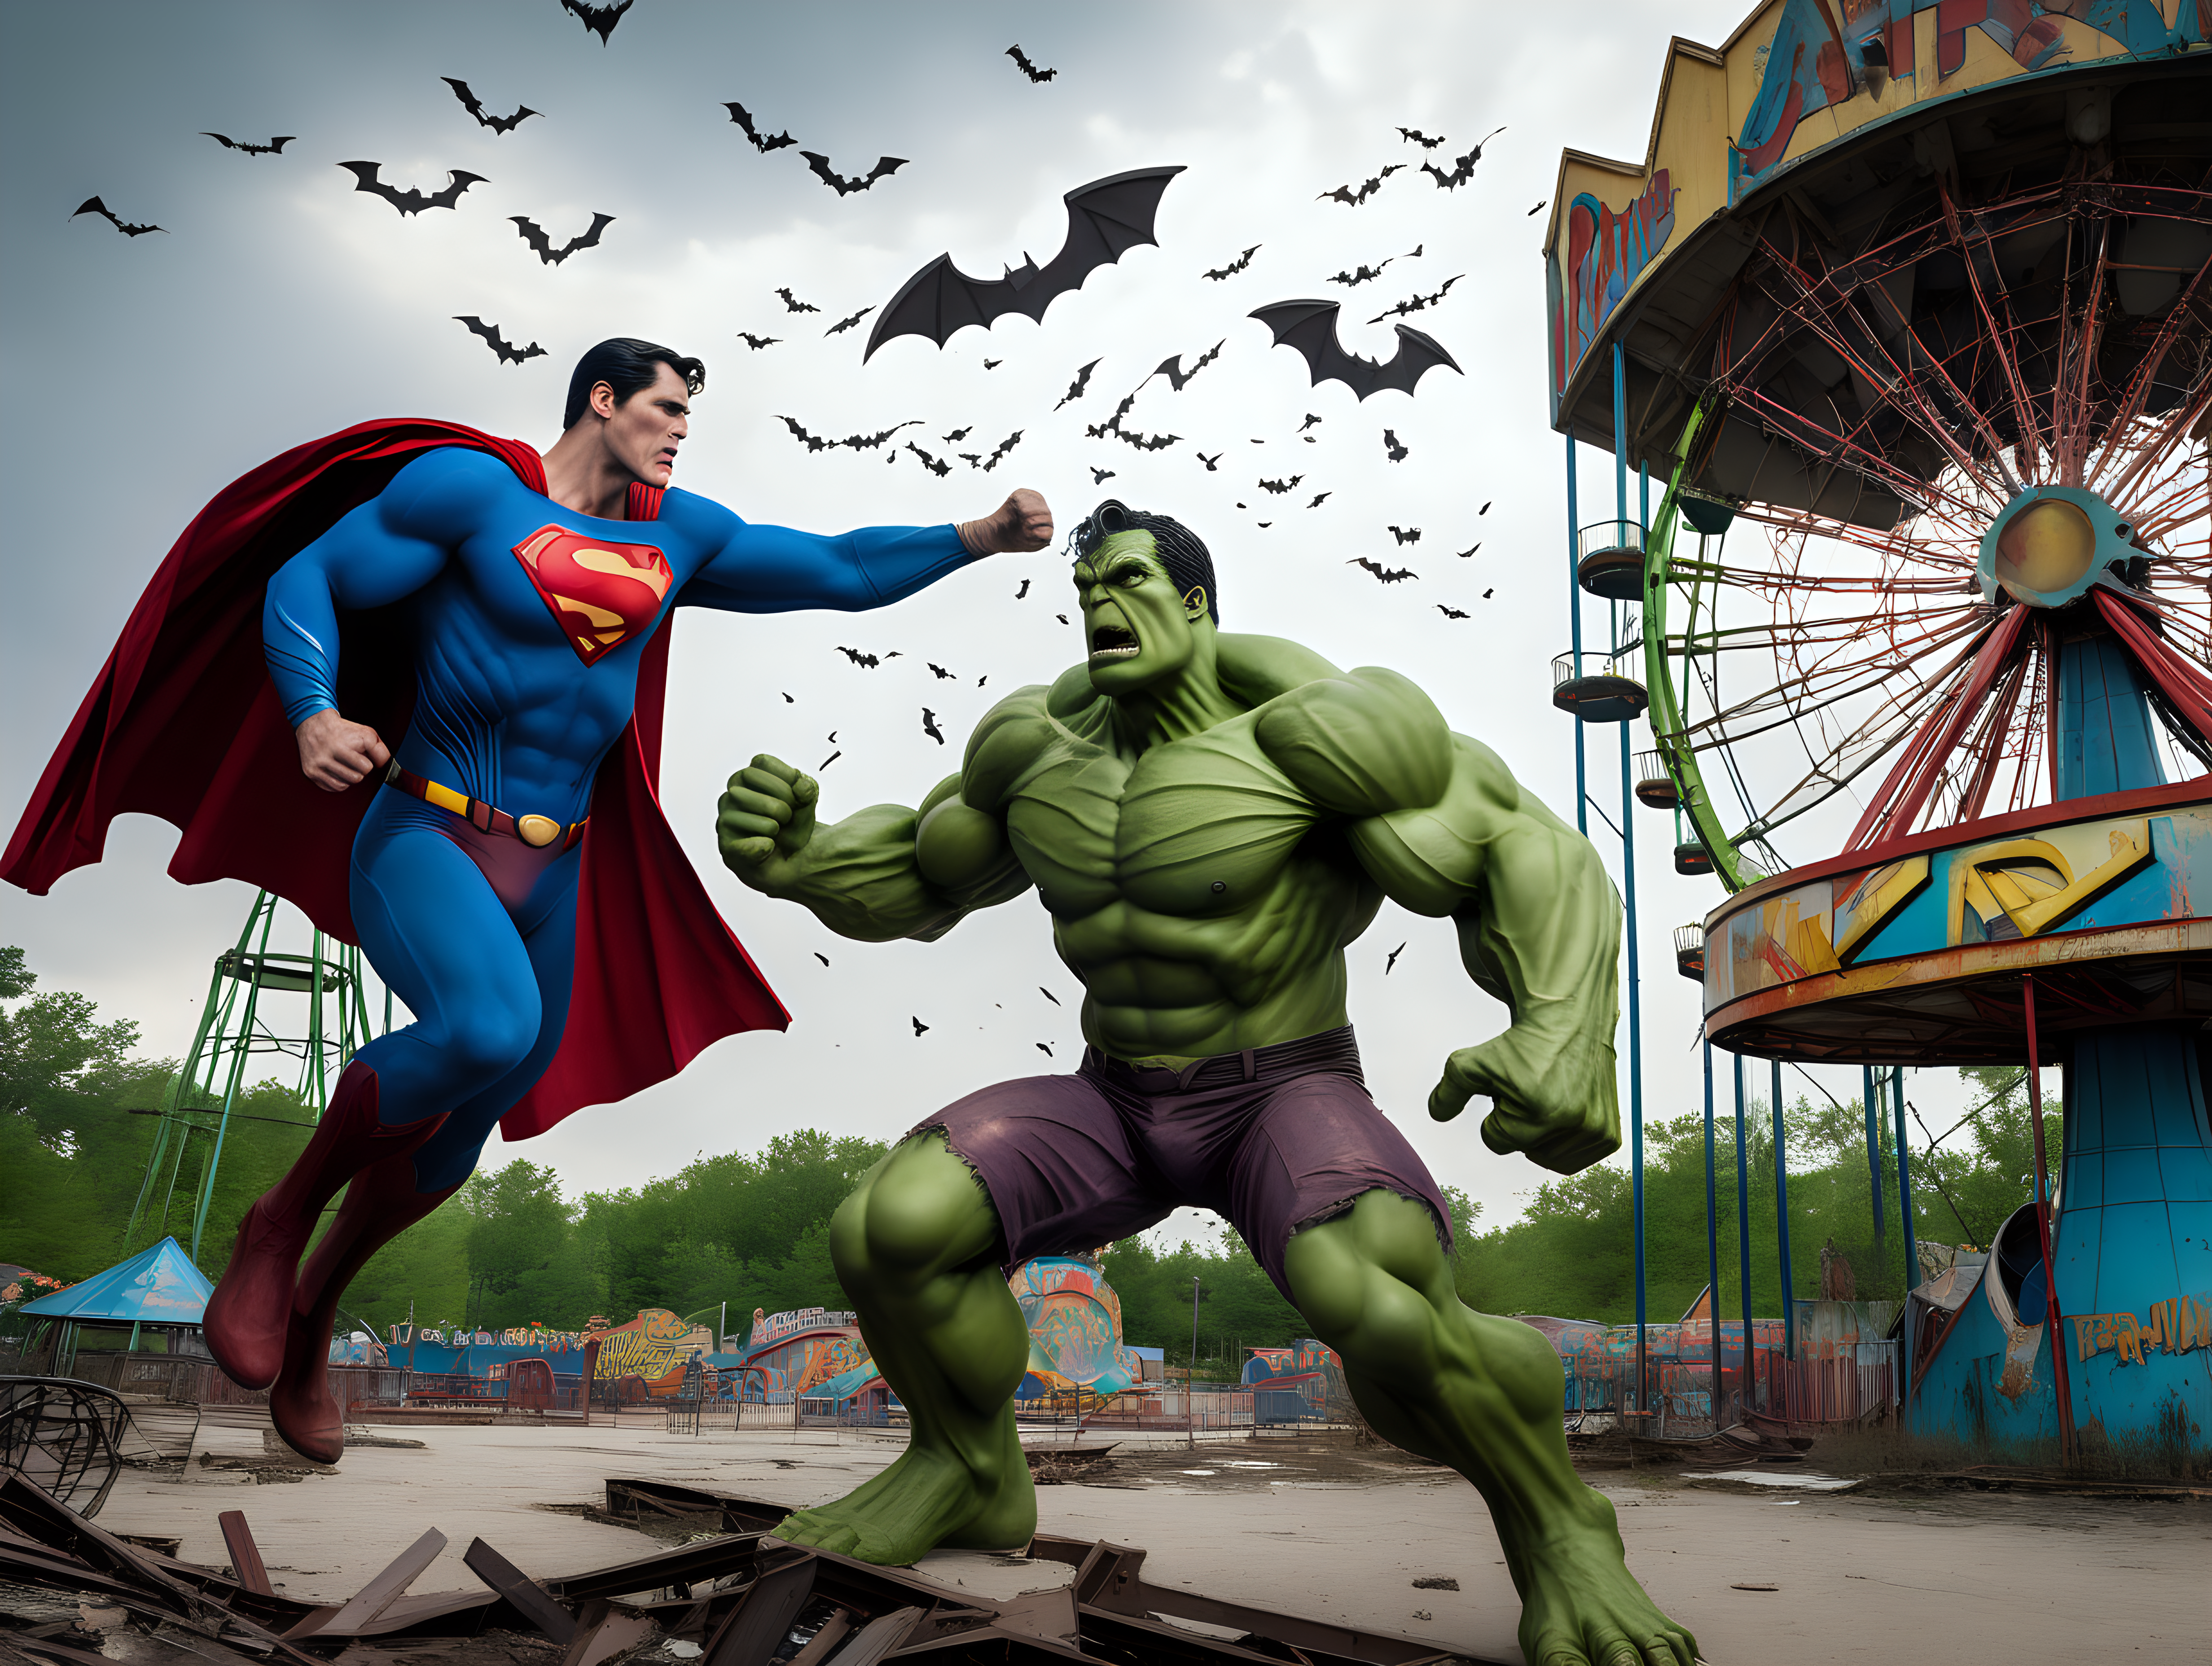 Superman fights the Hulk in an abandoned amusement